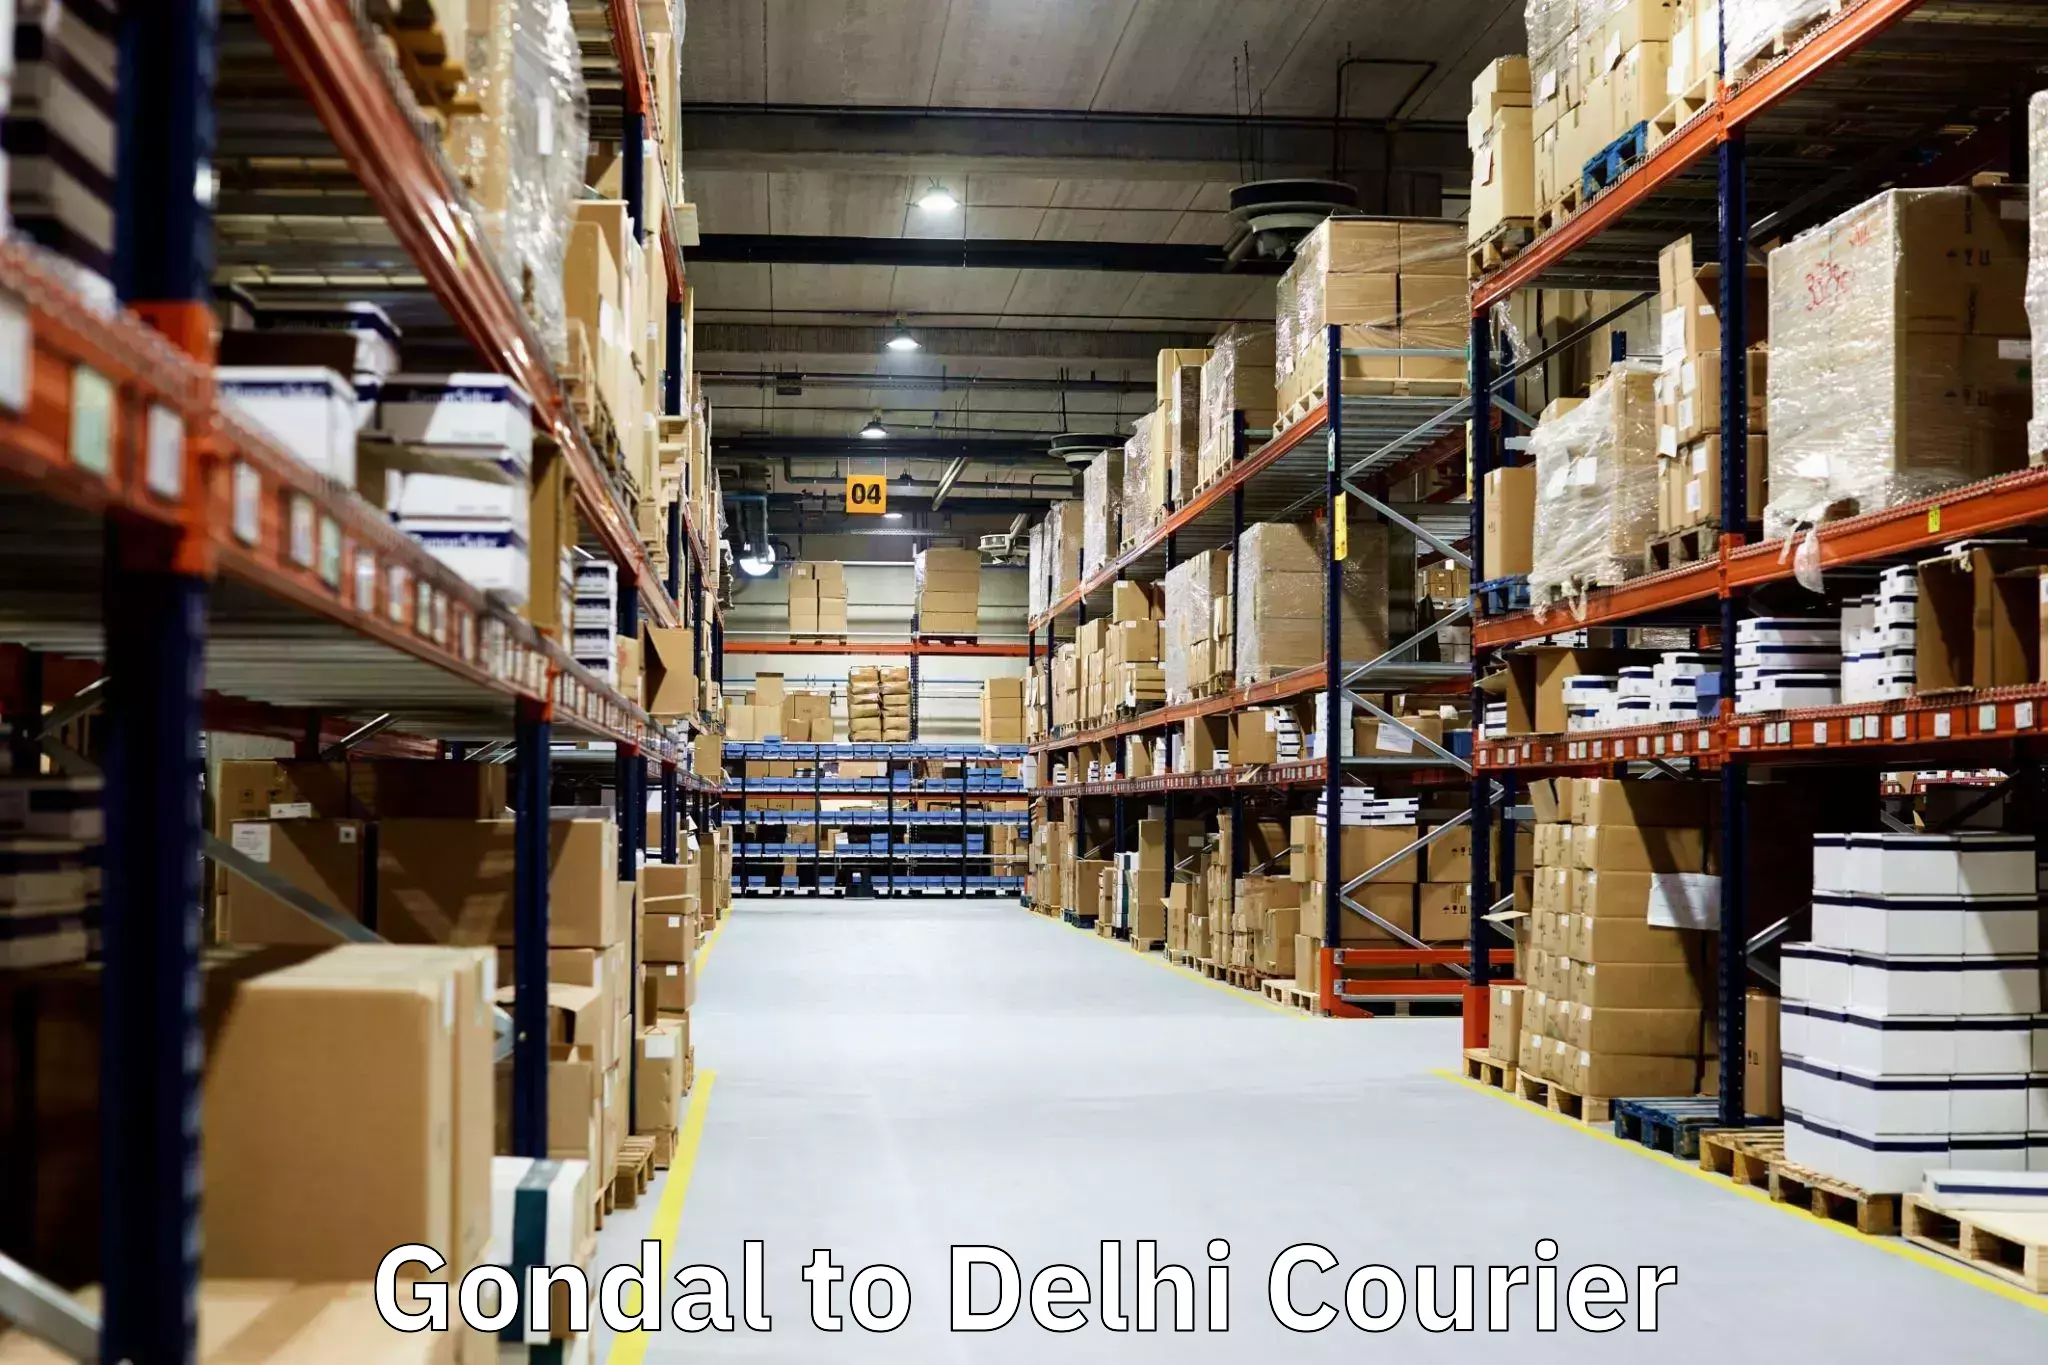 Trusted relocation experts Gondal to Delhi